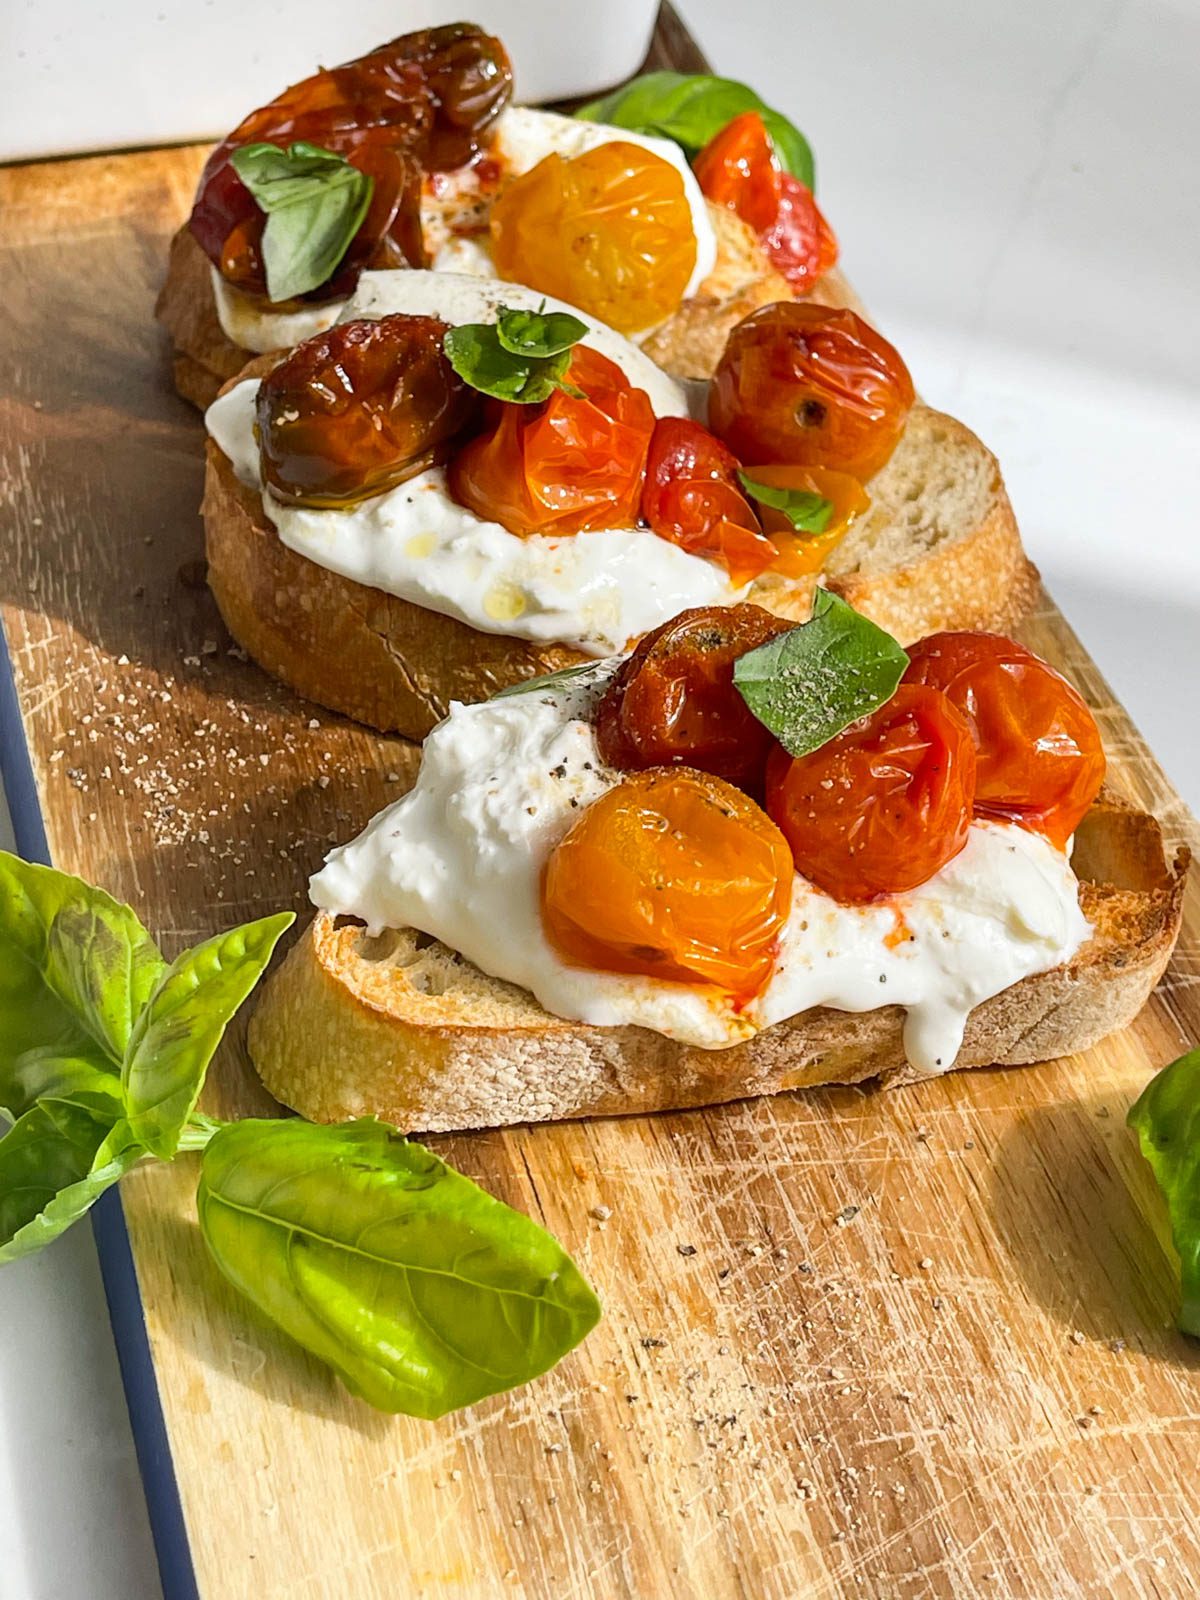 jammy tomatoes with burrata cheese on toasted bread and basil garnish on a wooden board